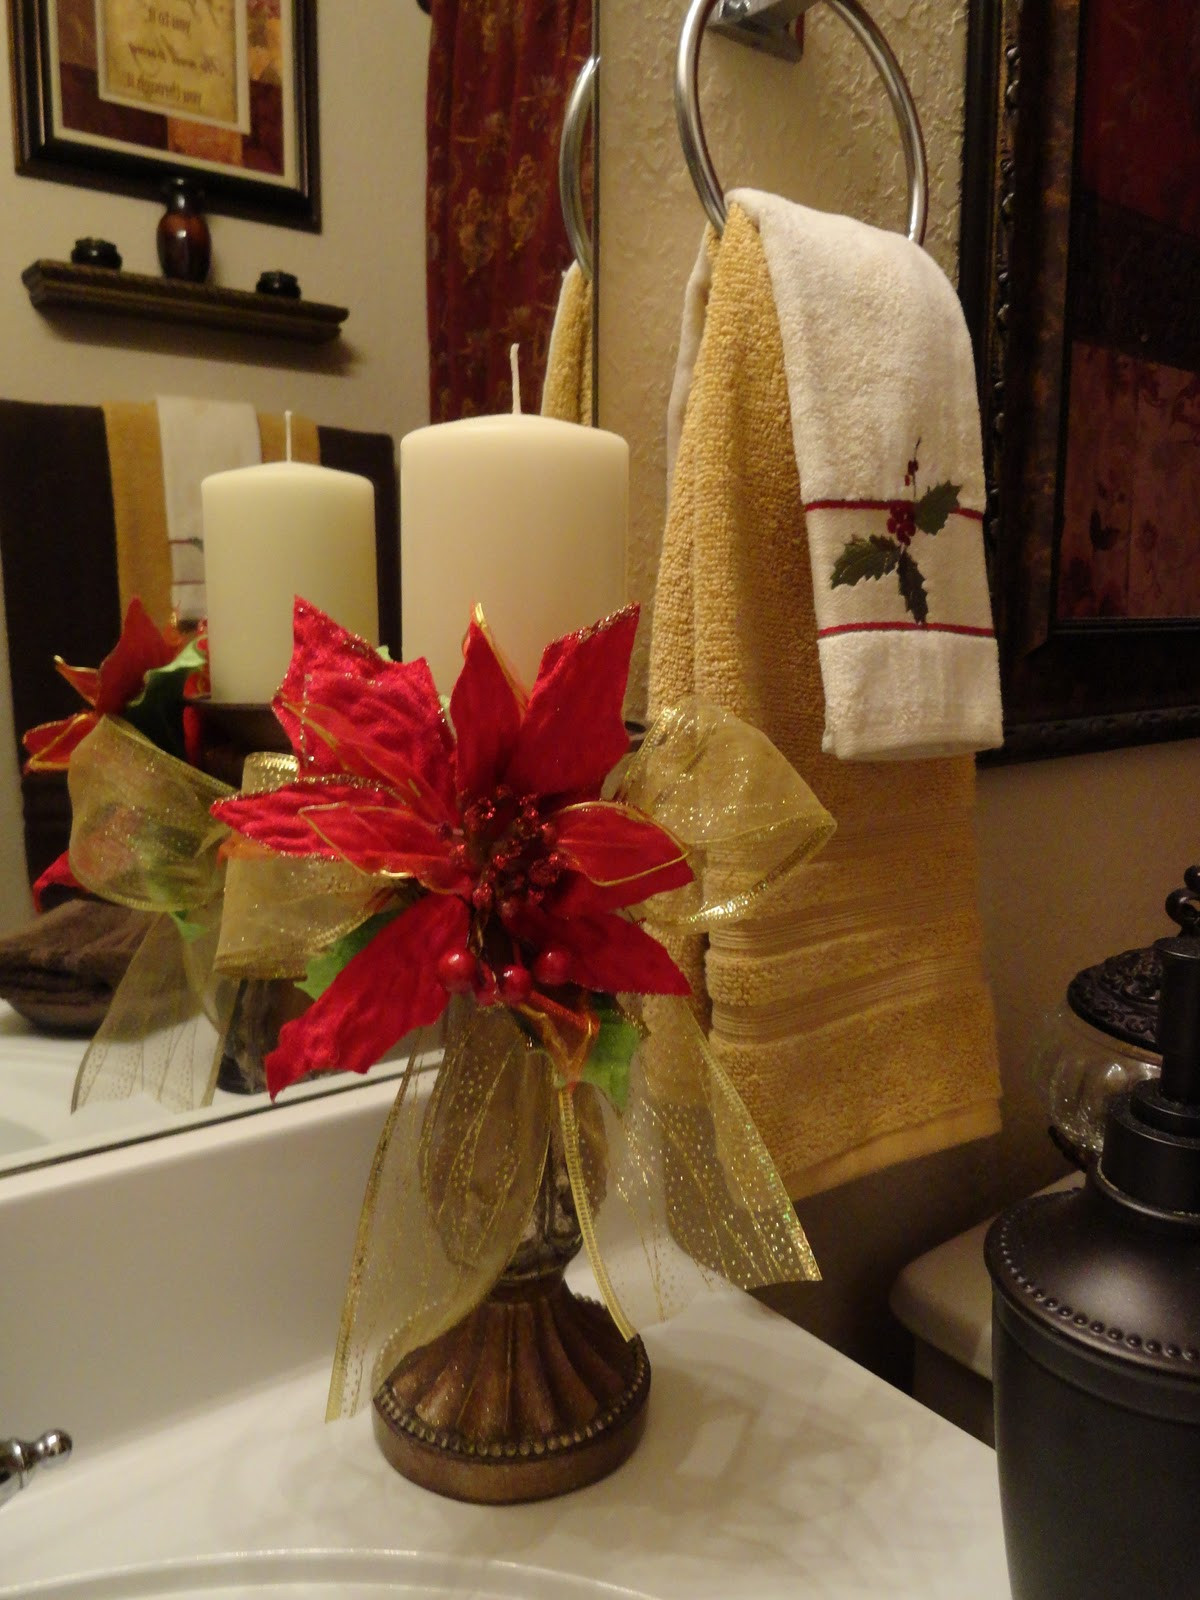 Christmas Bathroom Decor Set
 Our Home Away From Home A TOUCH OF CHRISTMAS IN THE GUEST